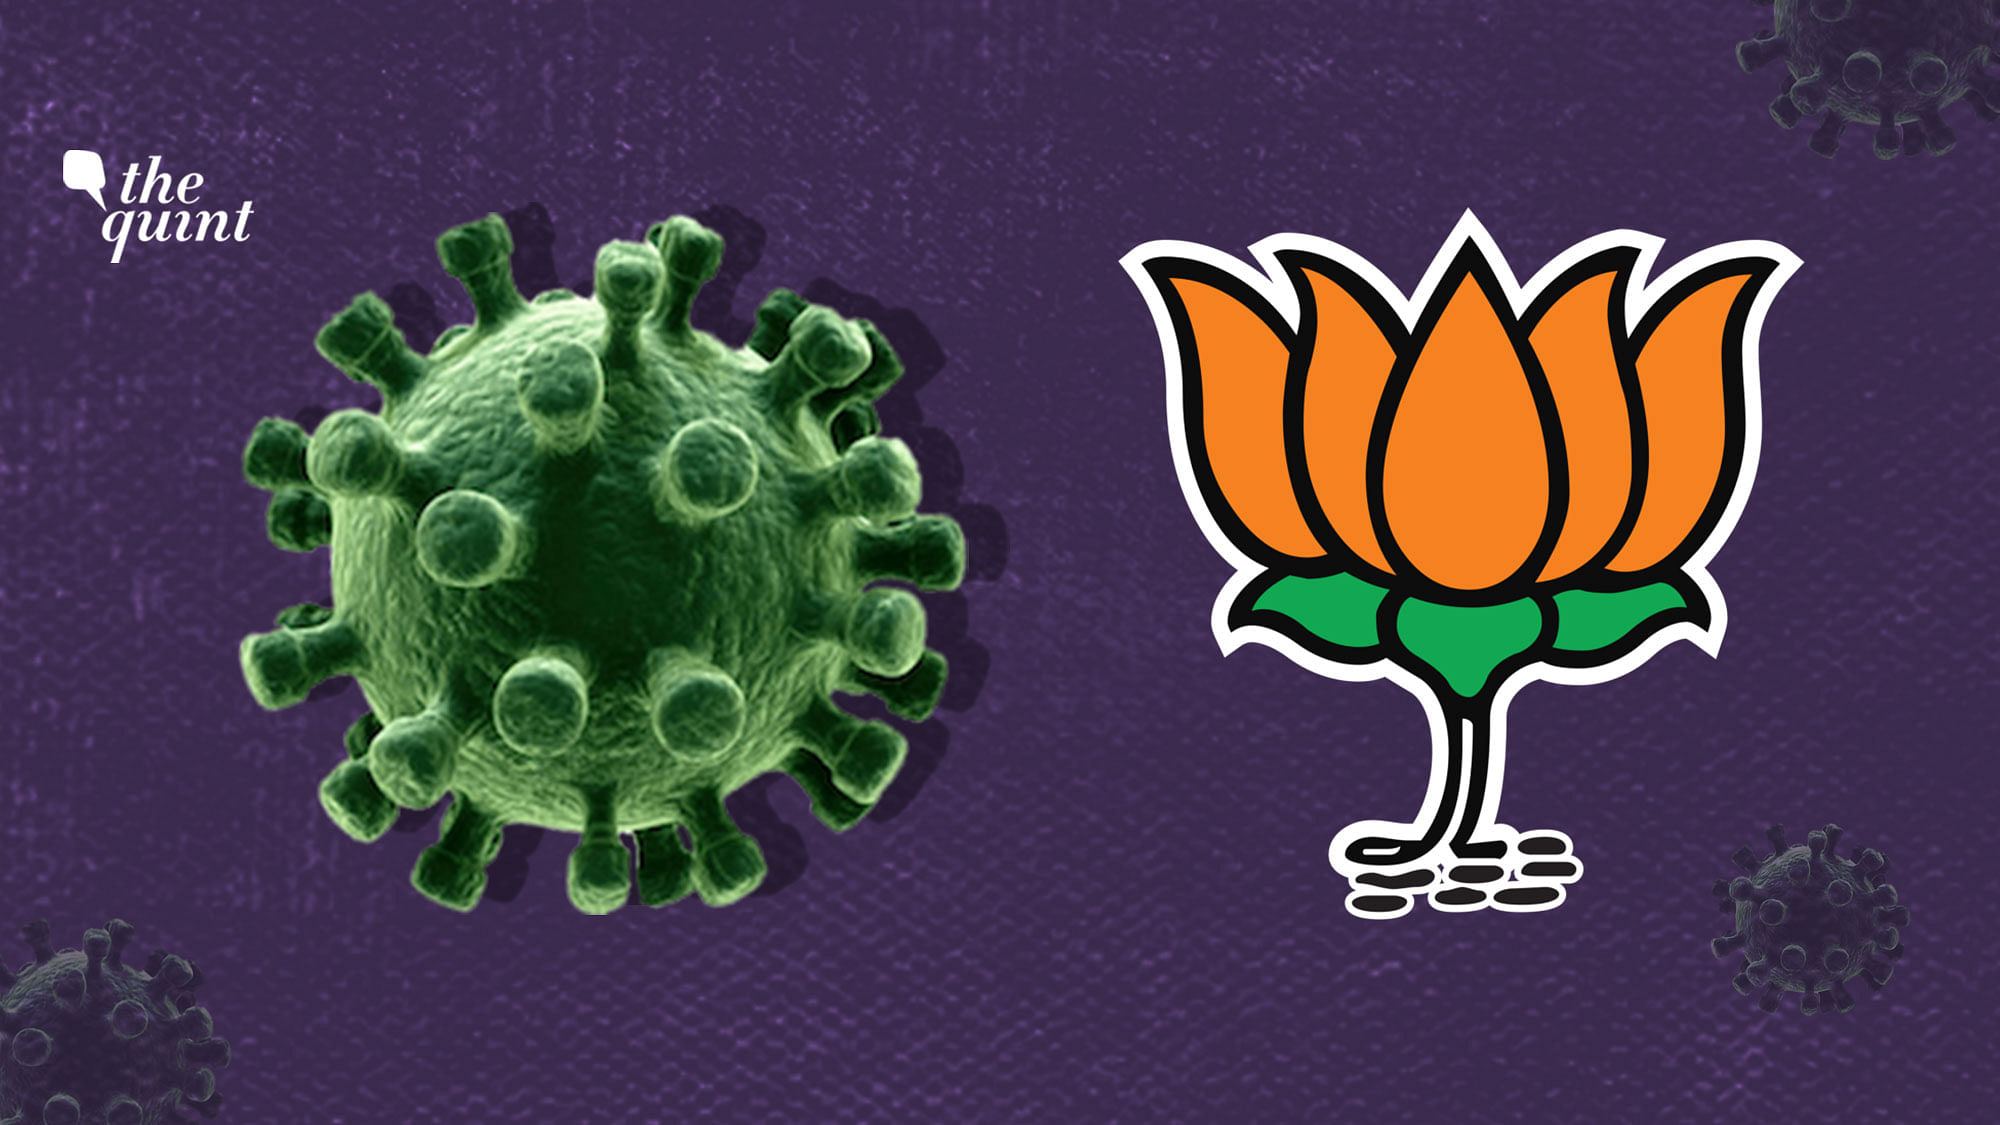 Image of BJP’s lotus symbol and an illustration of the coronavirus used for representational purposes.